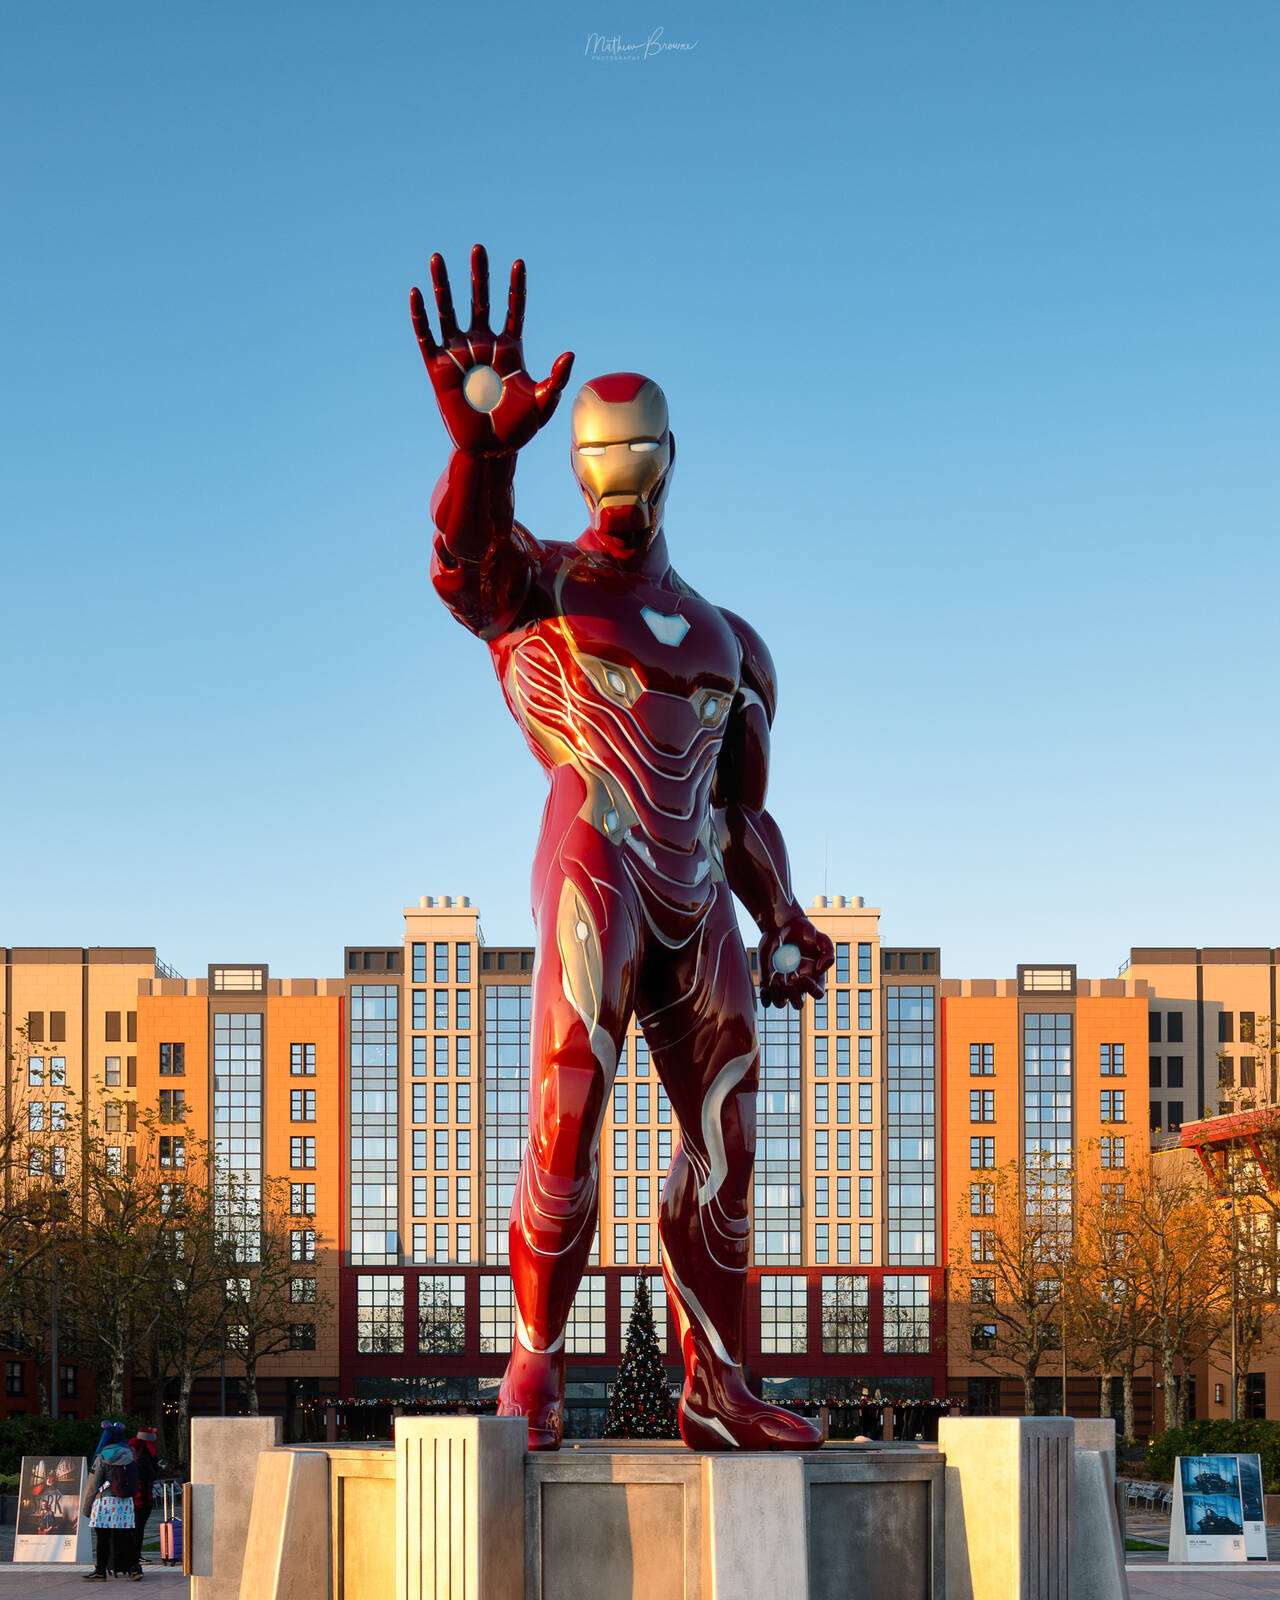 Image of Disney Hotel New York - The Art of Marvel by Mathew Browne